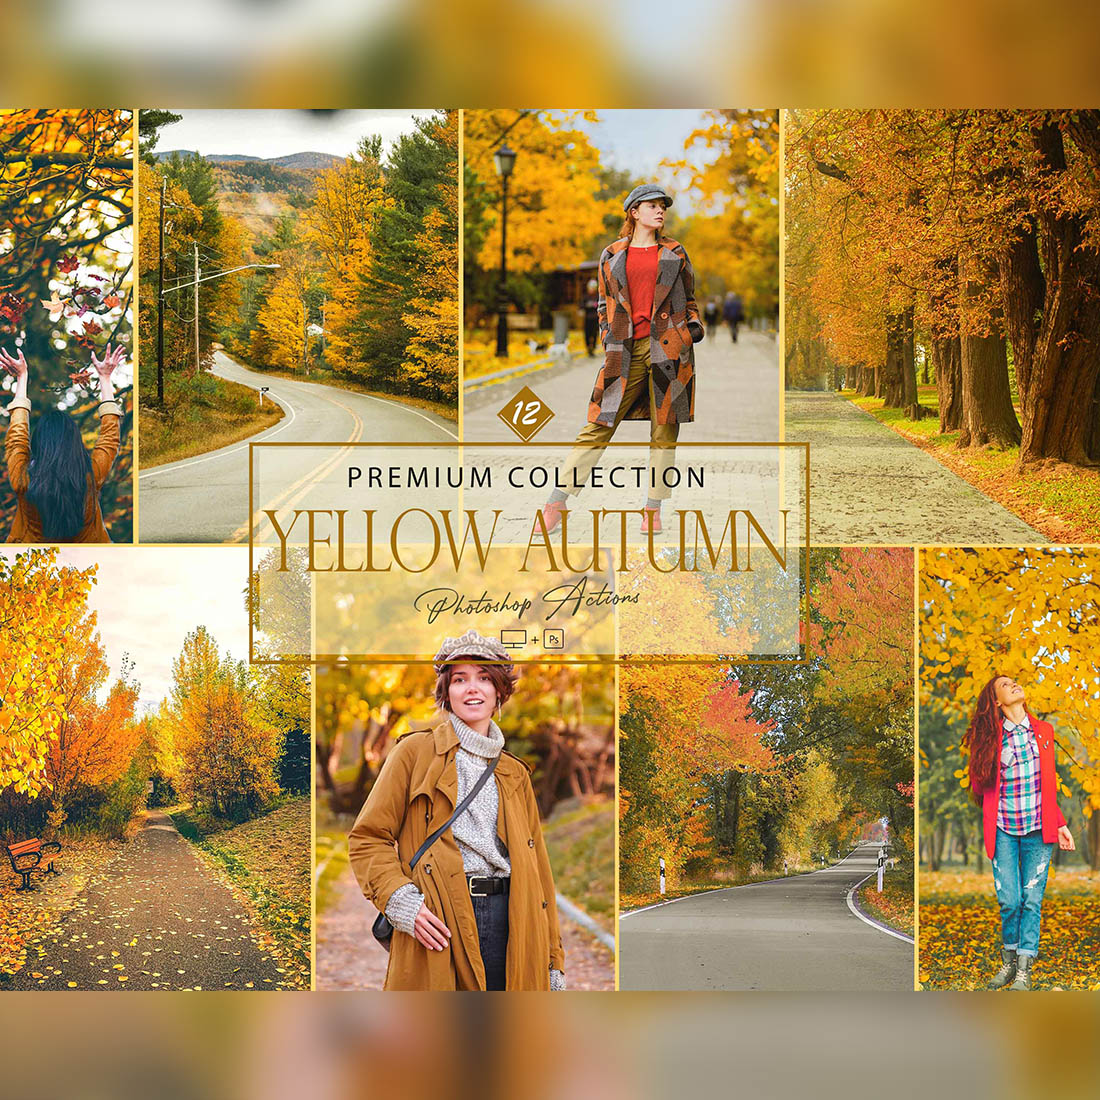 12 Photoshop Actions, Yellow Autumn Ps Action, Yellow ACR Preset, Saturation Filter, Lifestyle Theme For Instagram, Coastline Offshore, Bronze portrait cover image.